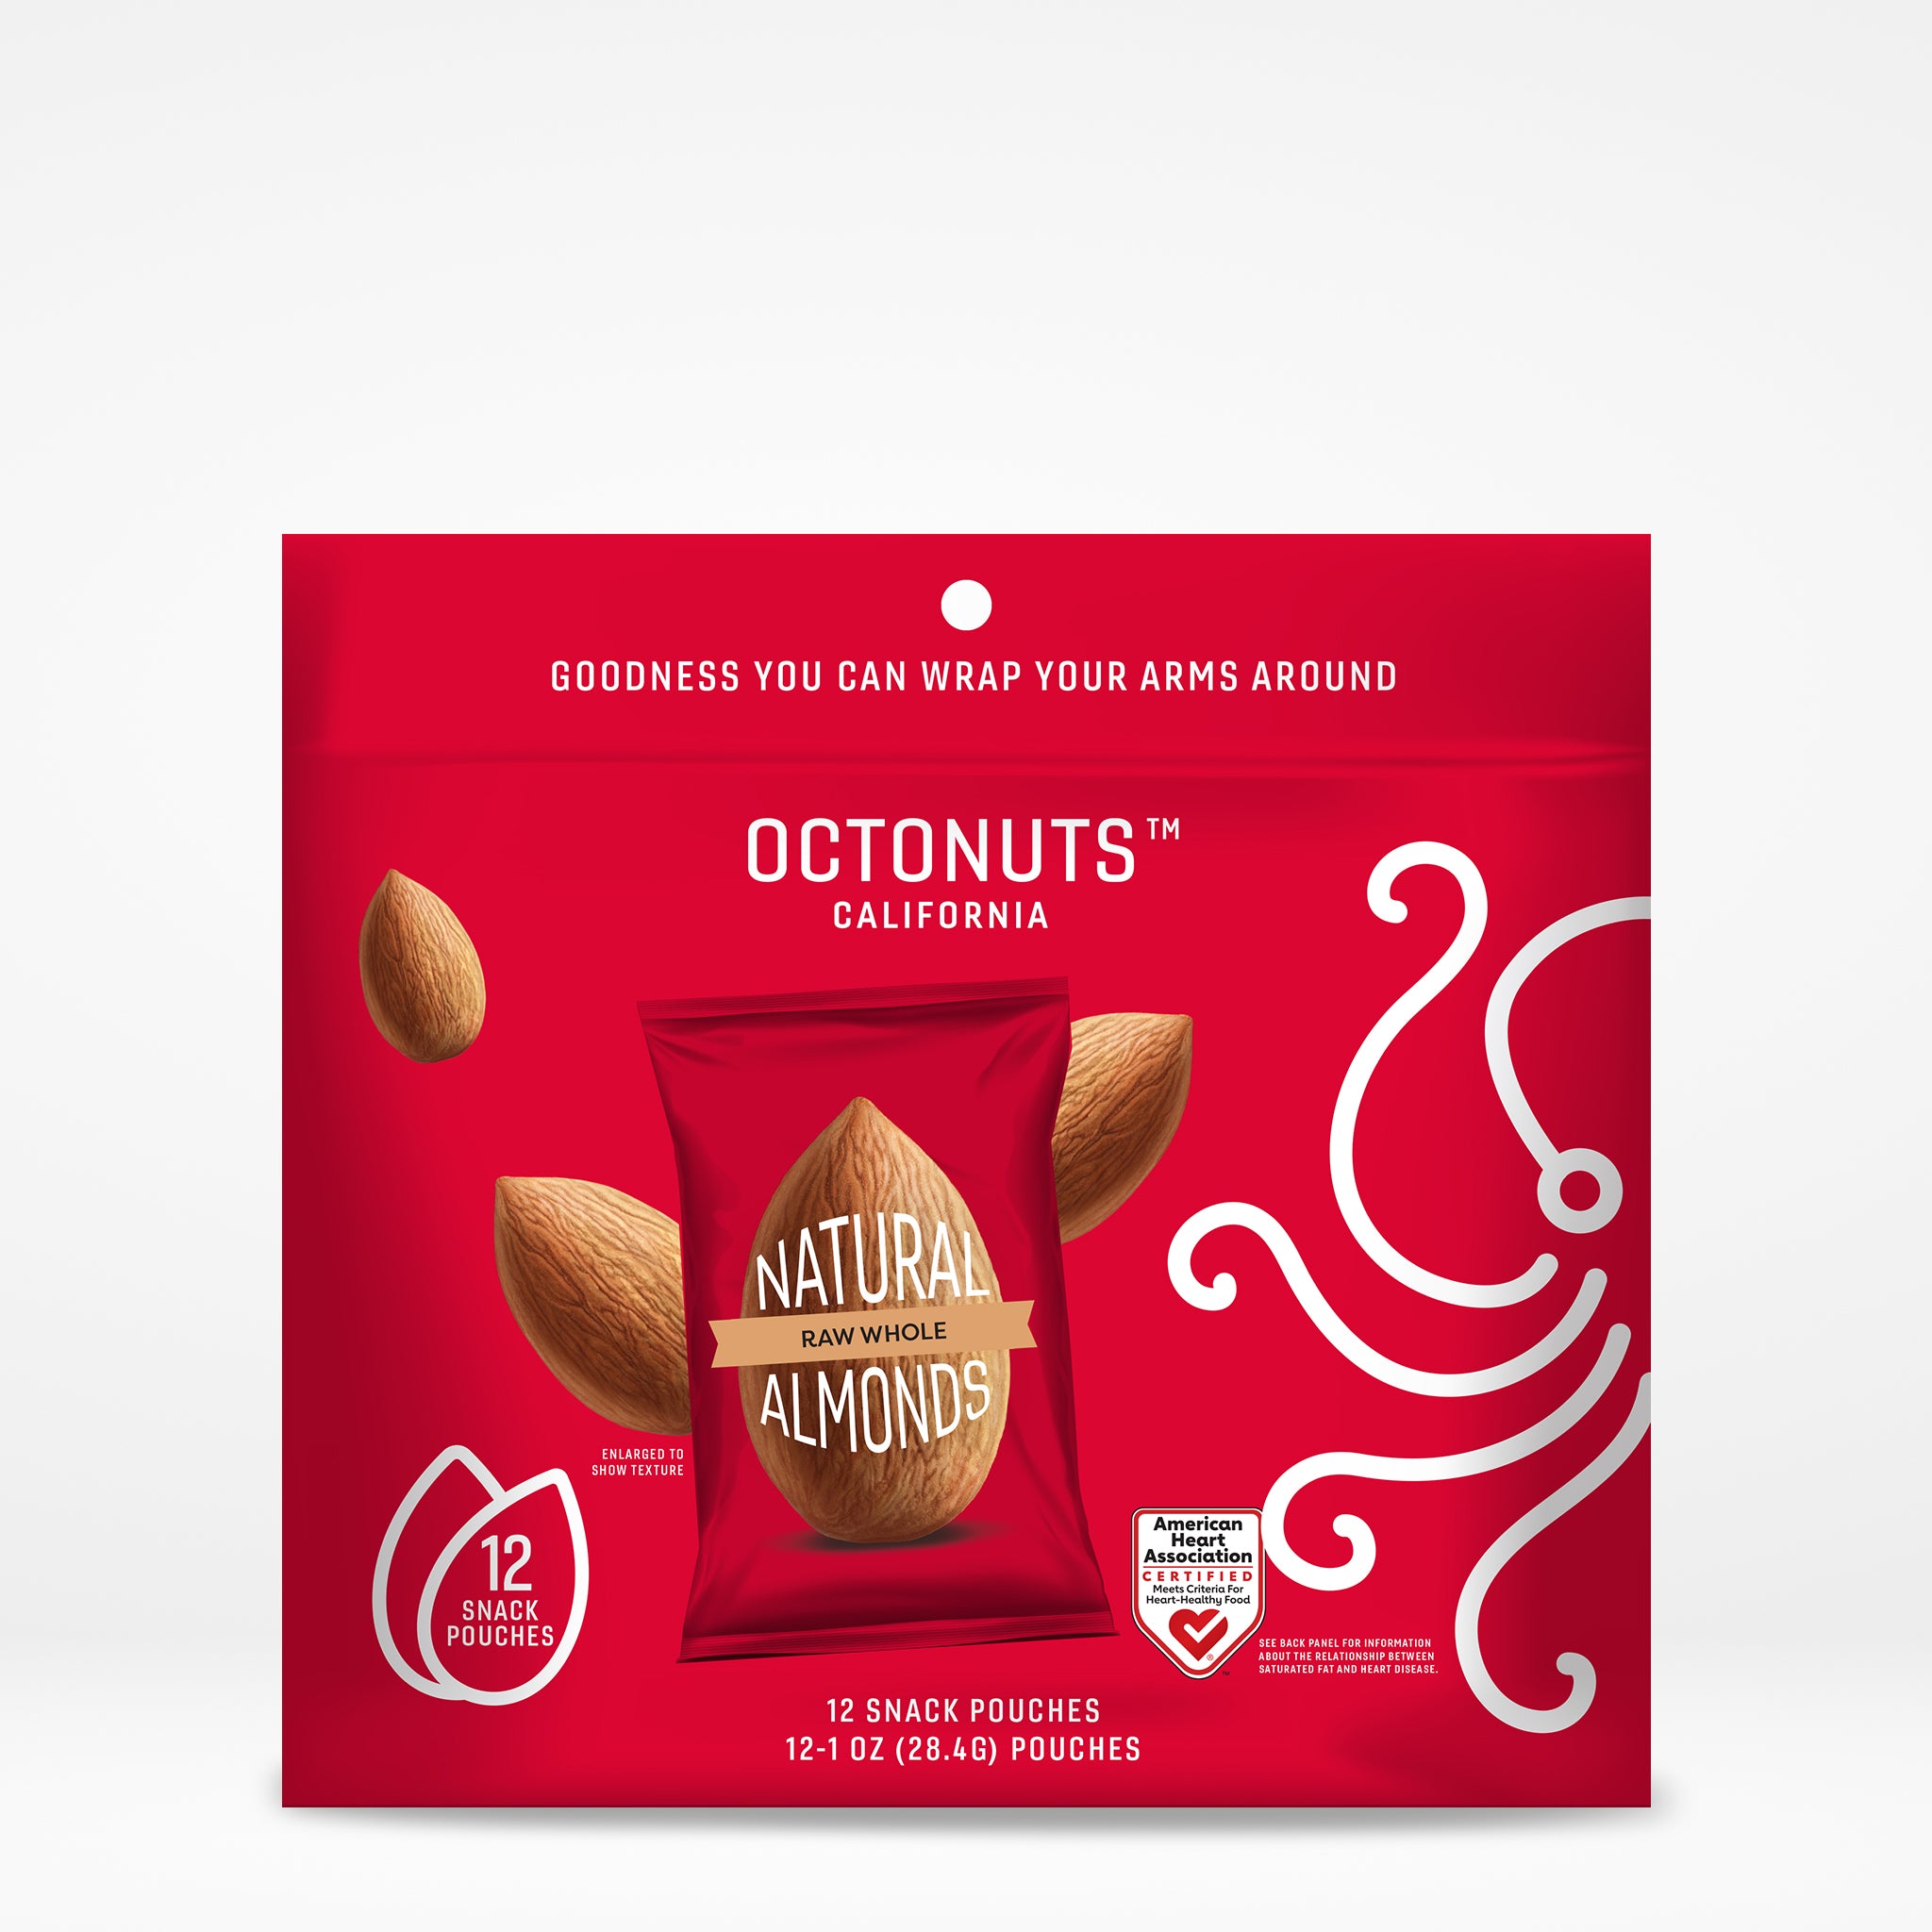 Raw Whole Almonds Multipack Octo-Pack (7 count)